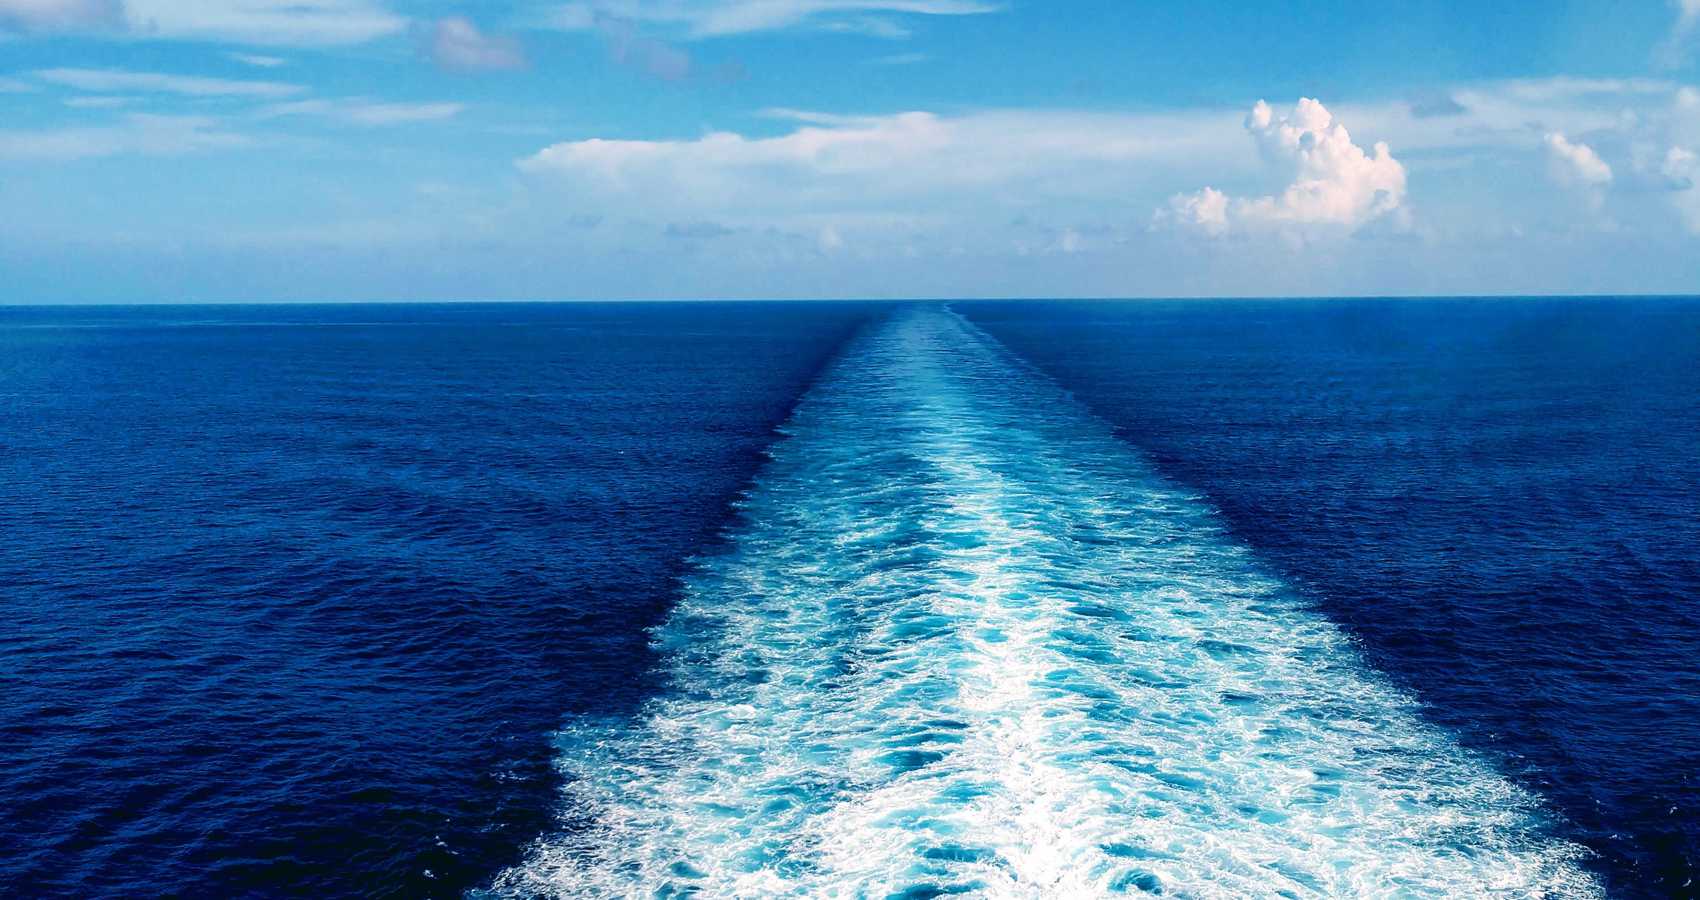 Crossing The Atlantic, a poem by Anne Sexton at Spillwords.com